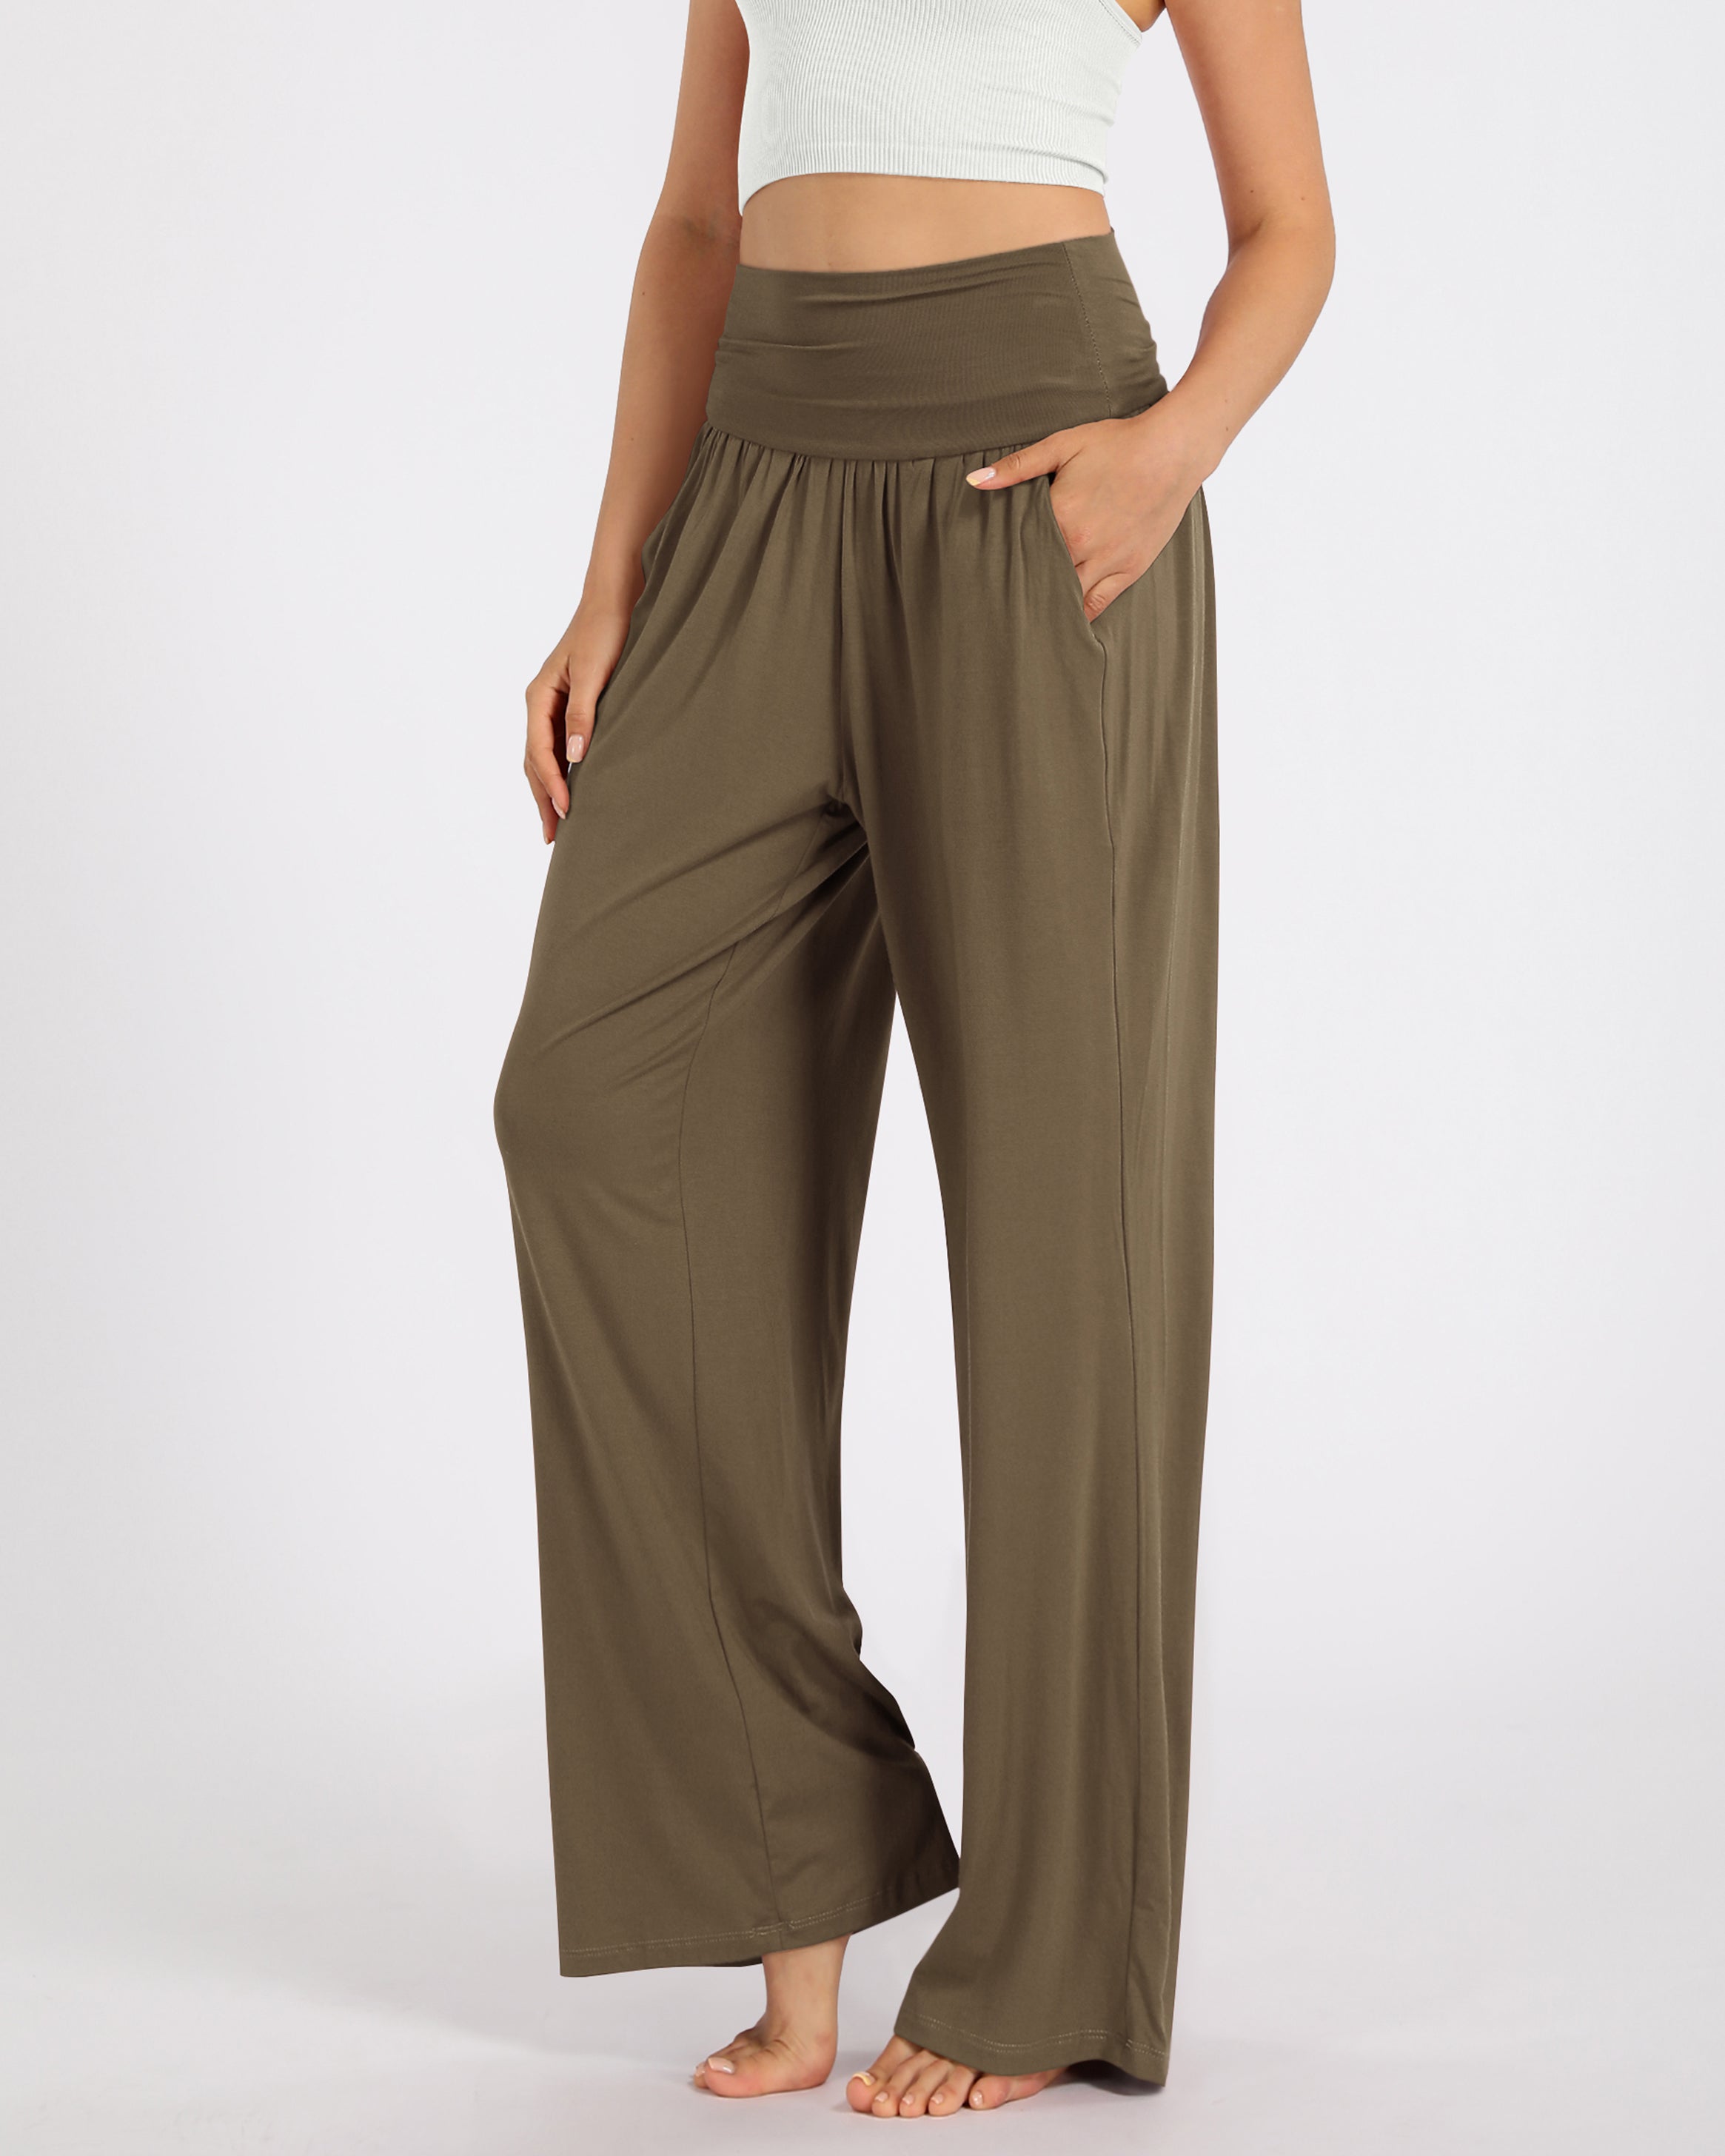 Wide Leg Lounge Pants with Pockets Brownie - ododos